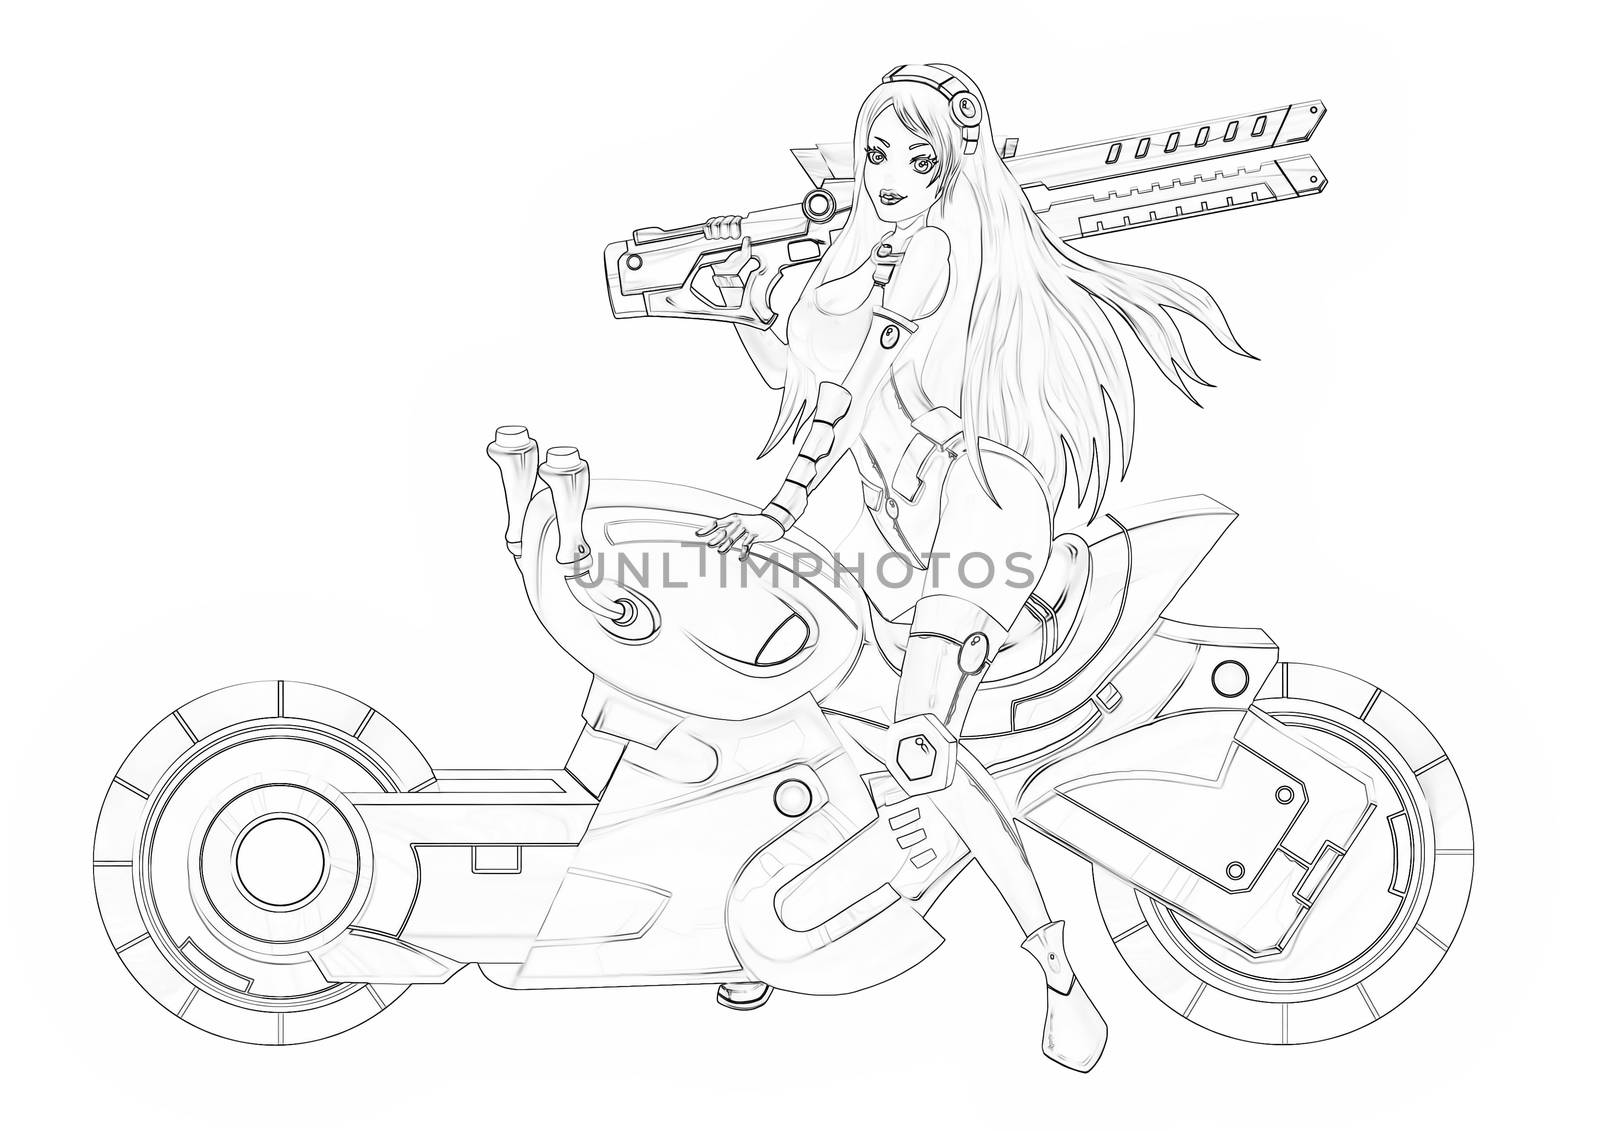 Illustration: Coloring Book Series: The Beautiful Bounty Hunter and Her Motorcycle. Soft thin line. Print it and bring it to Life with Color! Fantastic Outline / Sketch / Line Art Design. by NextMars